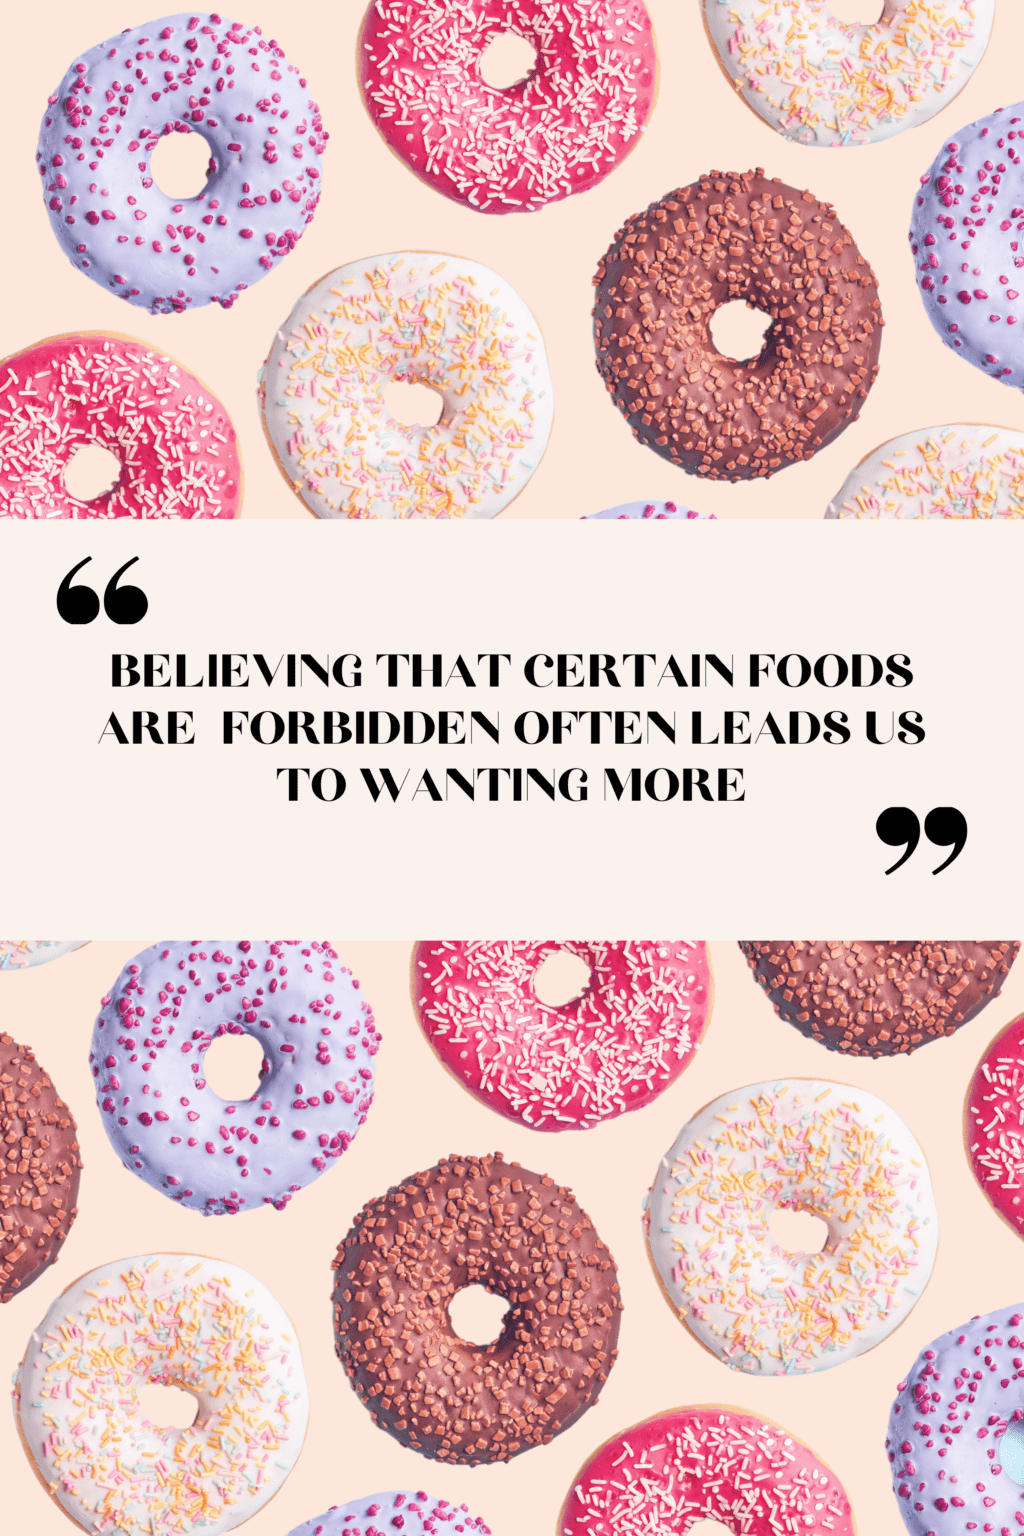 A pattern of donuts on a light pink background. The donuts are purple icing with pink sprinkles, pink icing with light pink sprinkles, white icing with multi-color sprinkles and brown icing with nuts. There is text overlay that reads"believing that certain foods are forbidden often leads us to wanting more". 